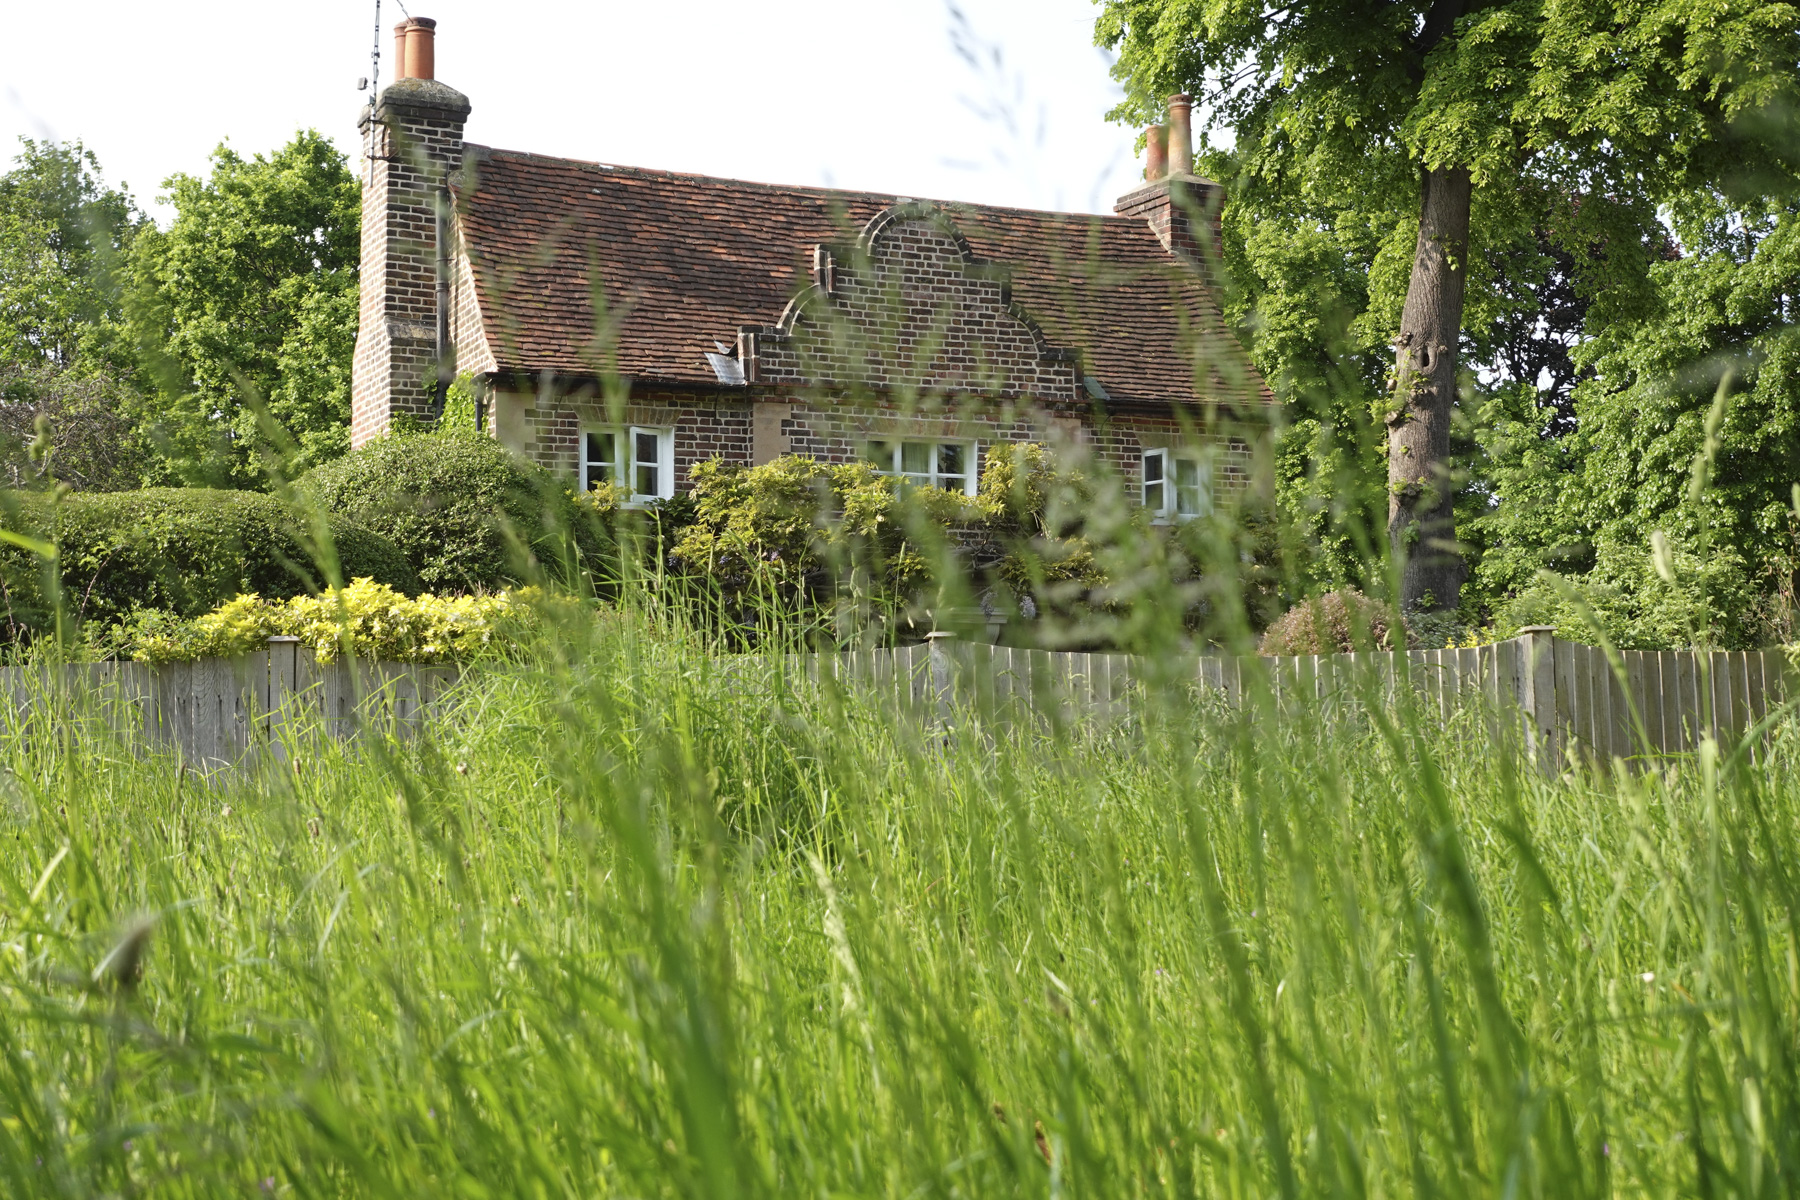 Low angle through long grass of a country house